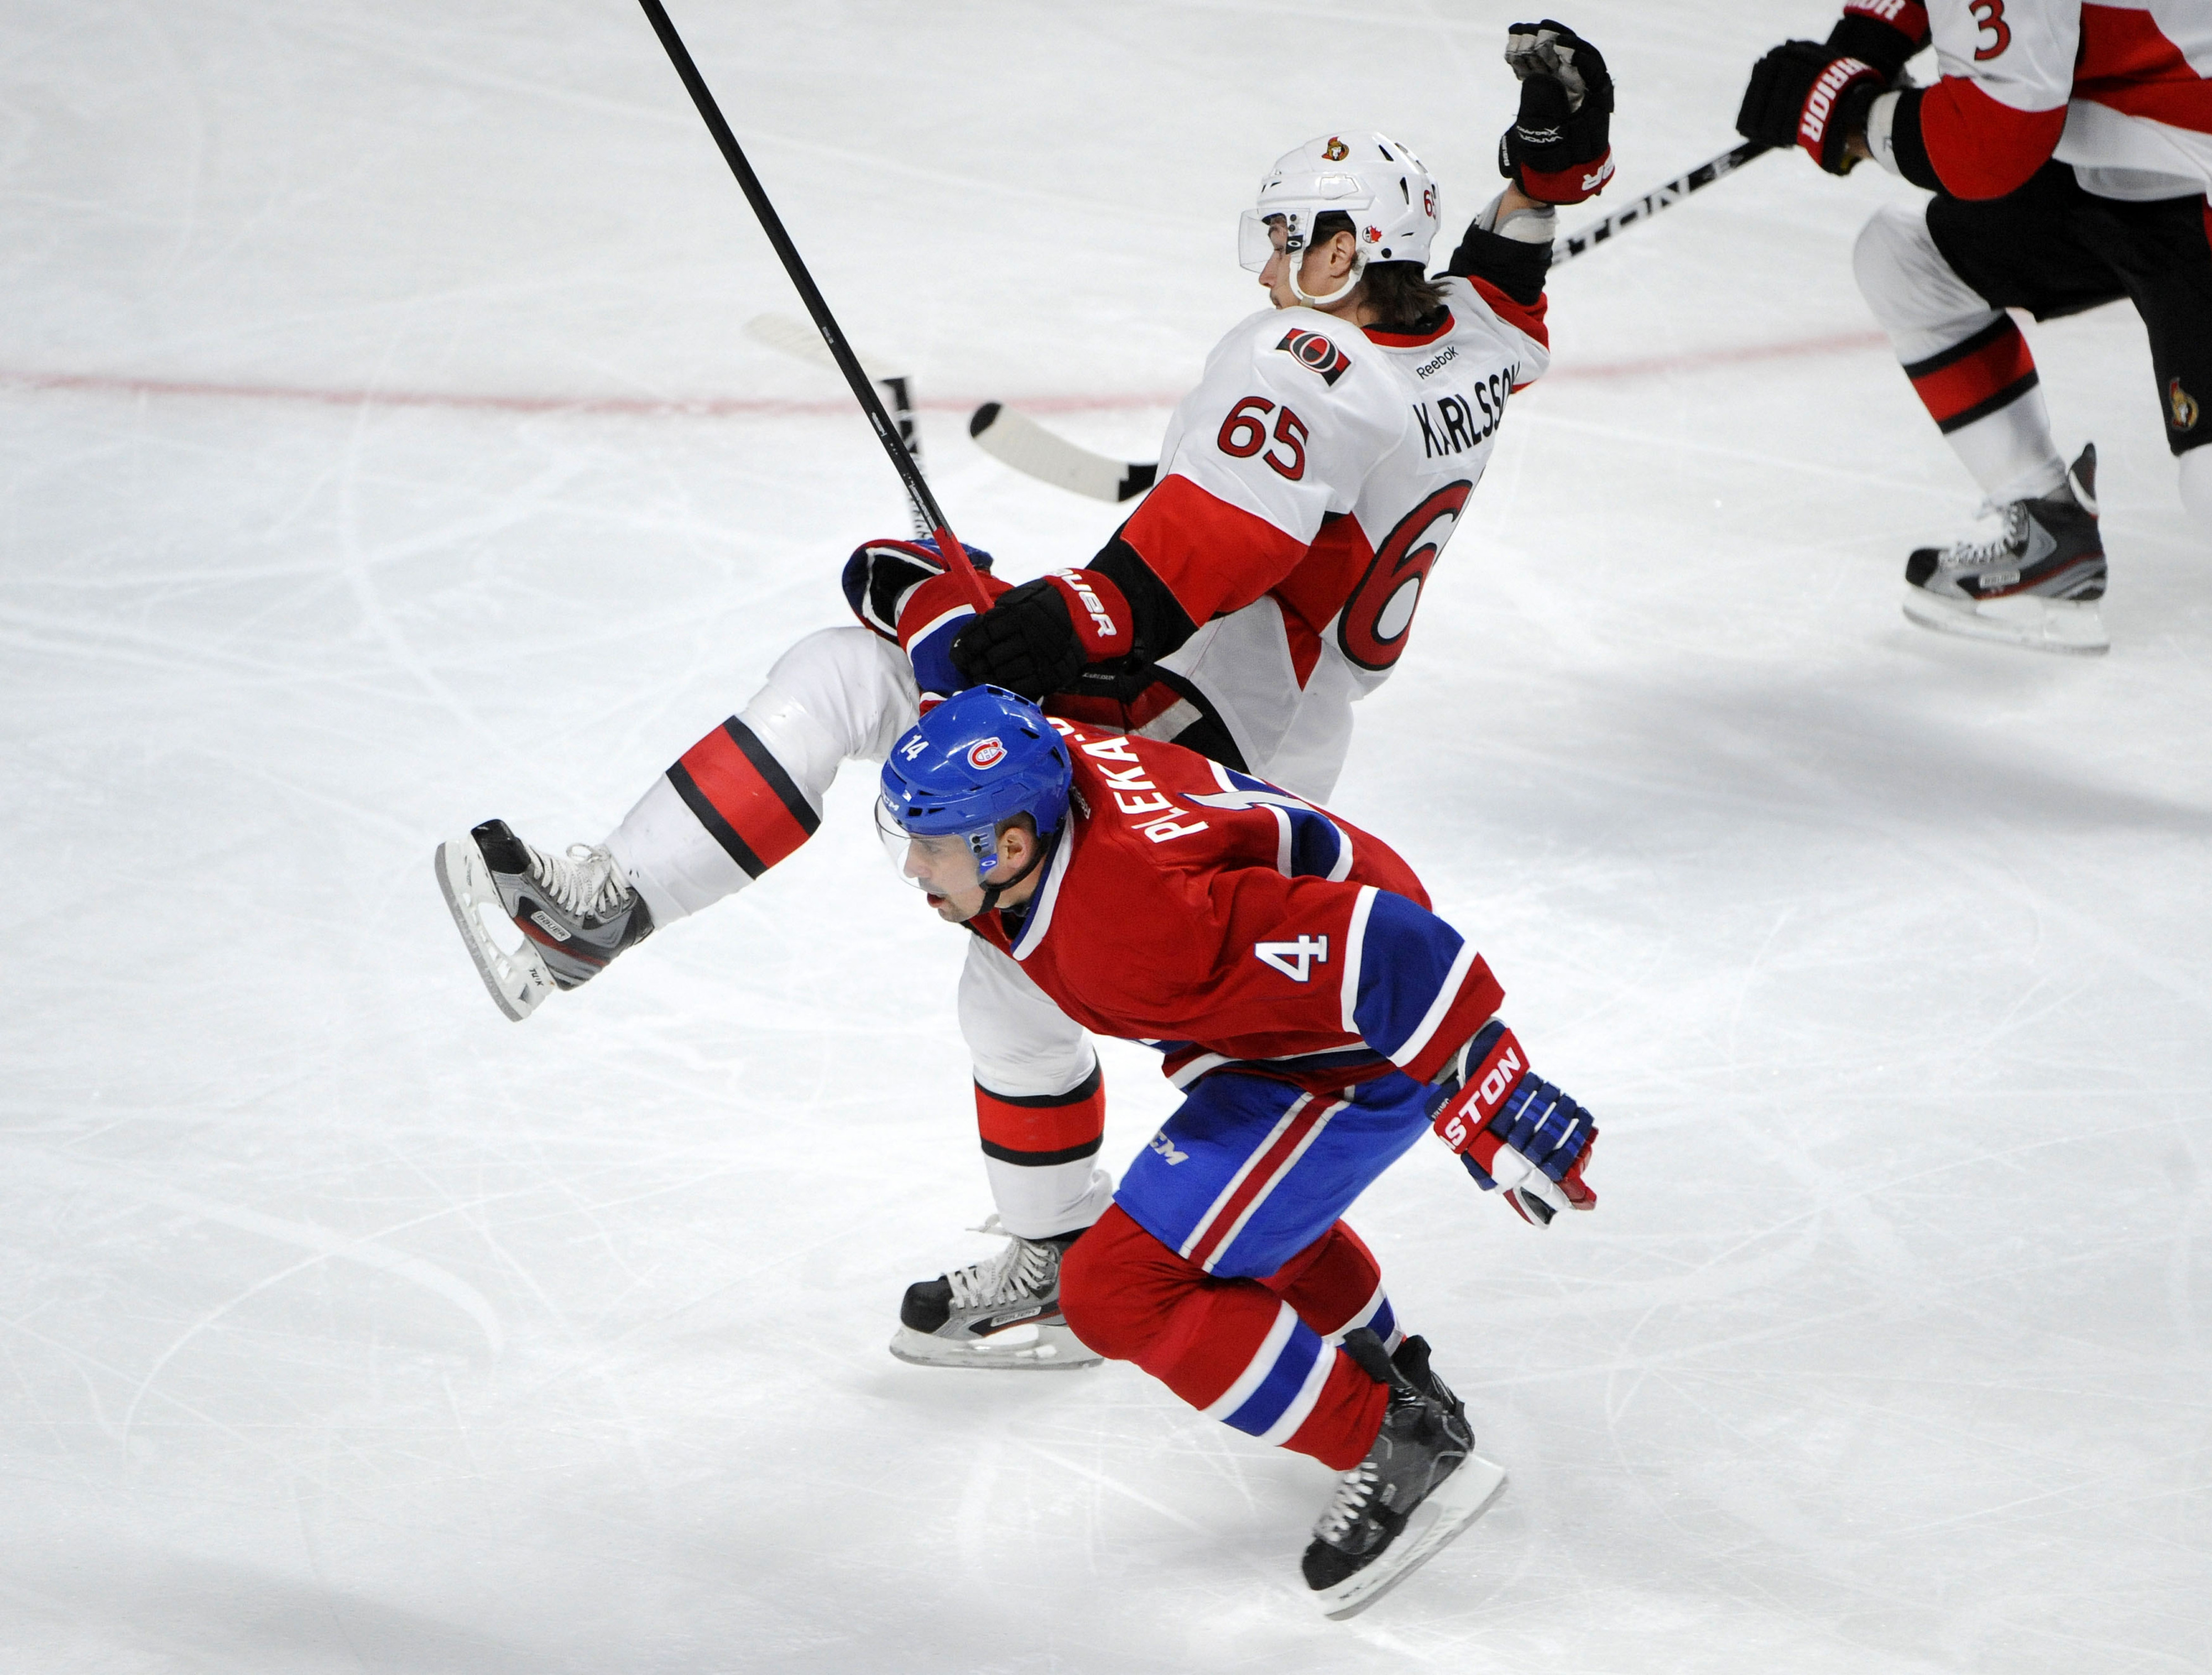 Tomas Plekanec plays the highest quality of competition among Habs forwards and has for years.